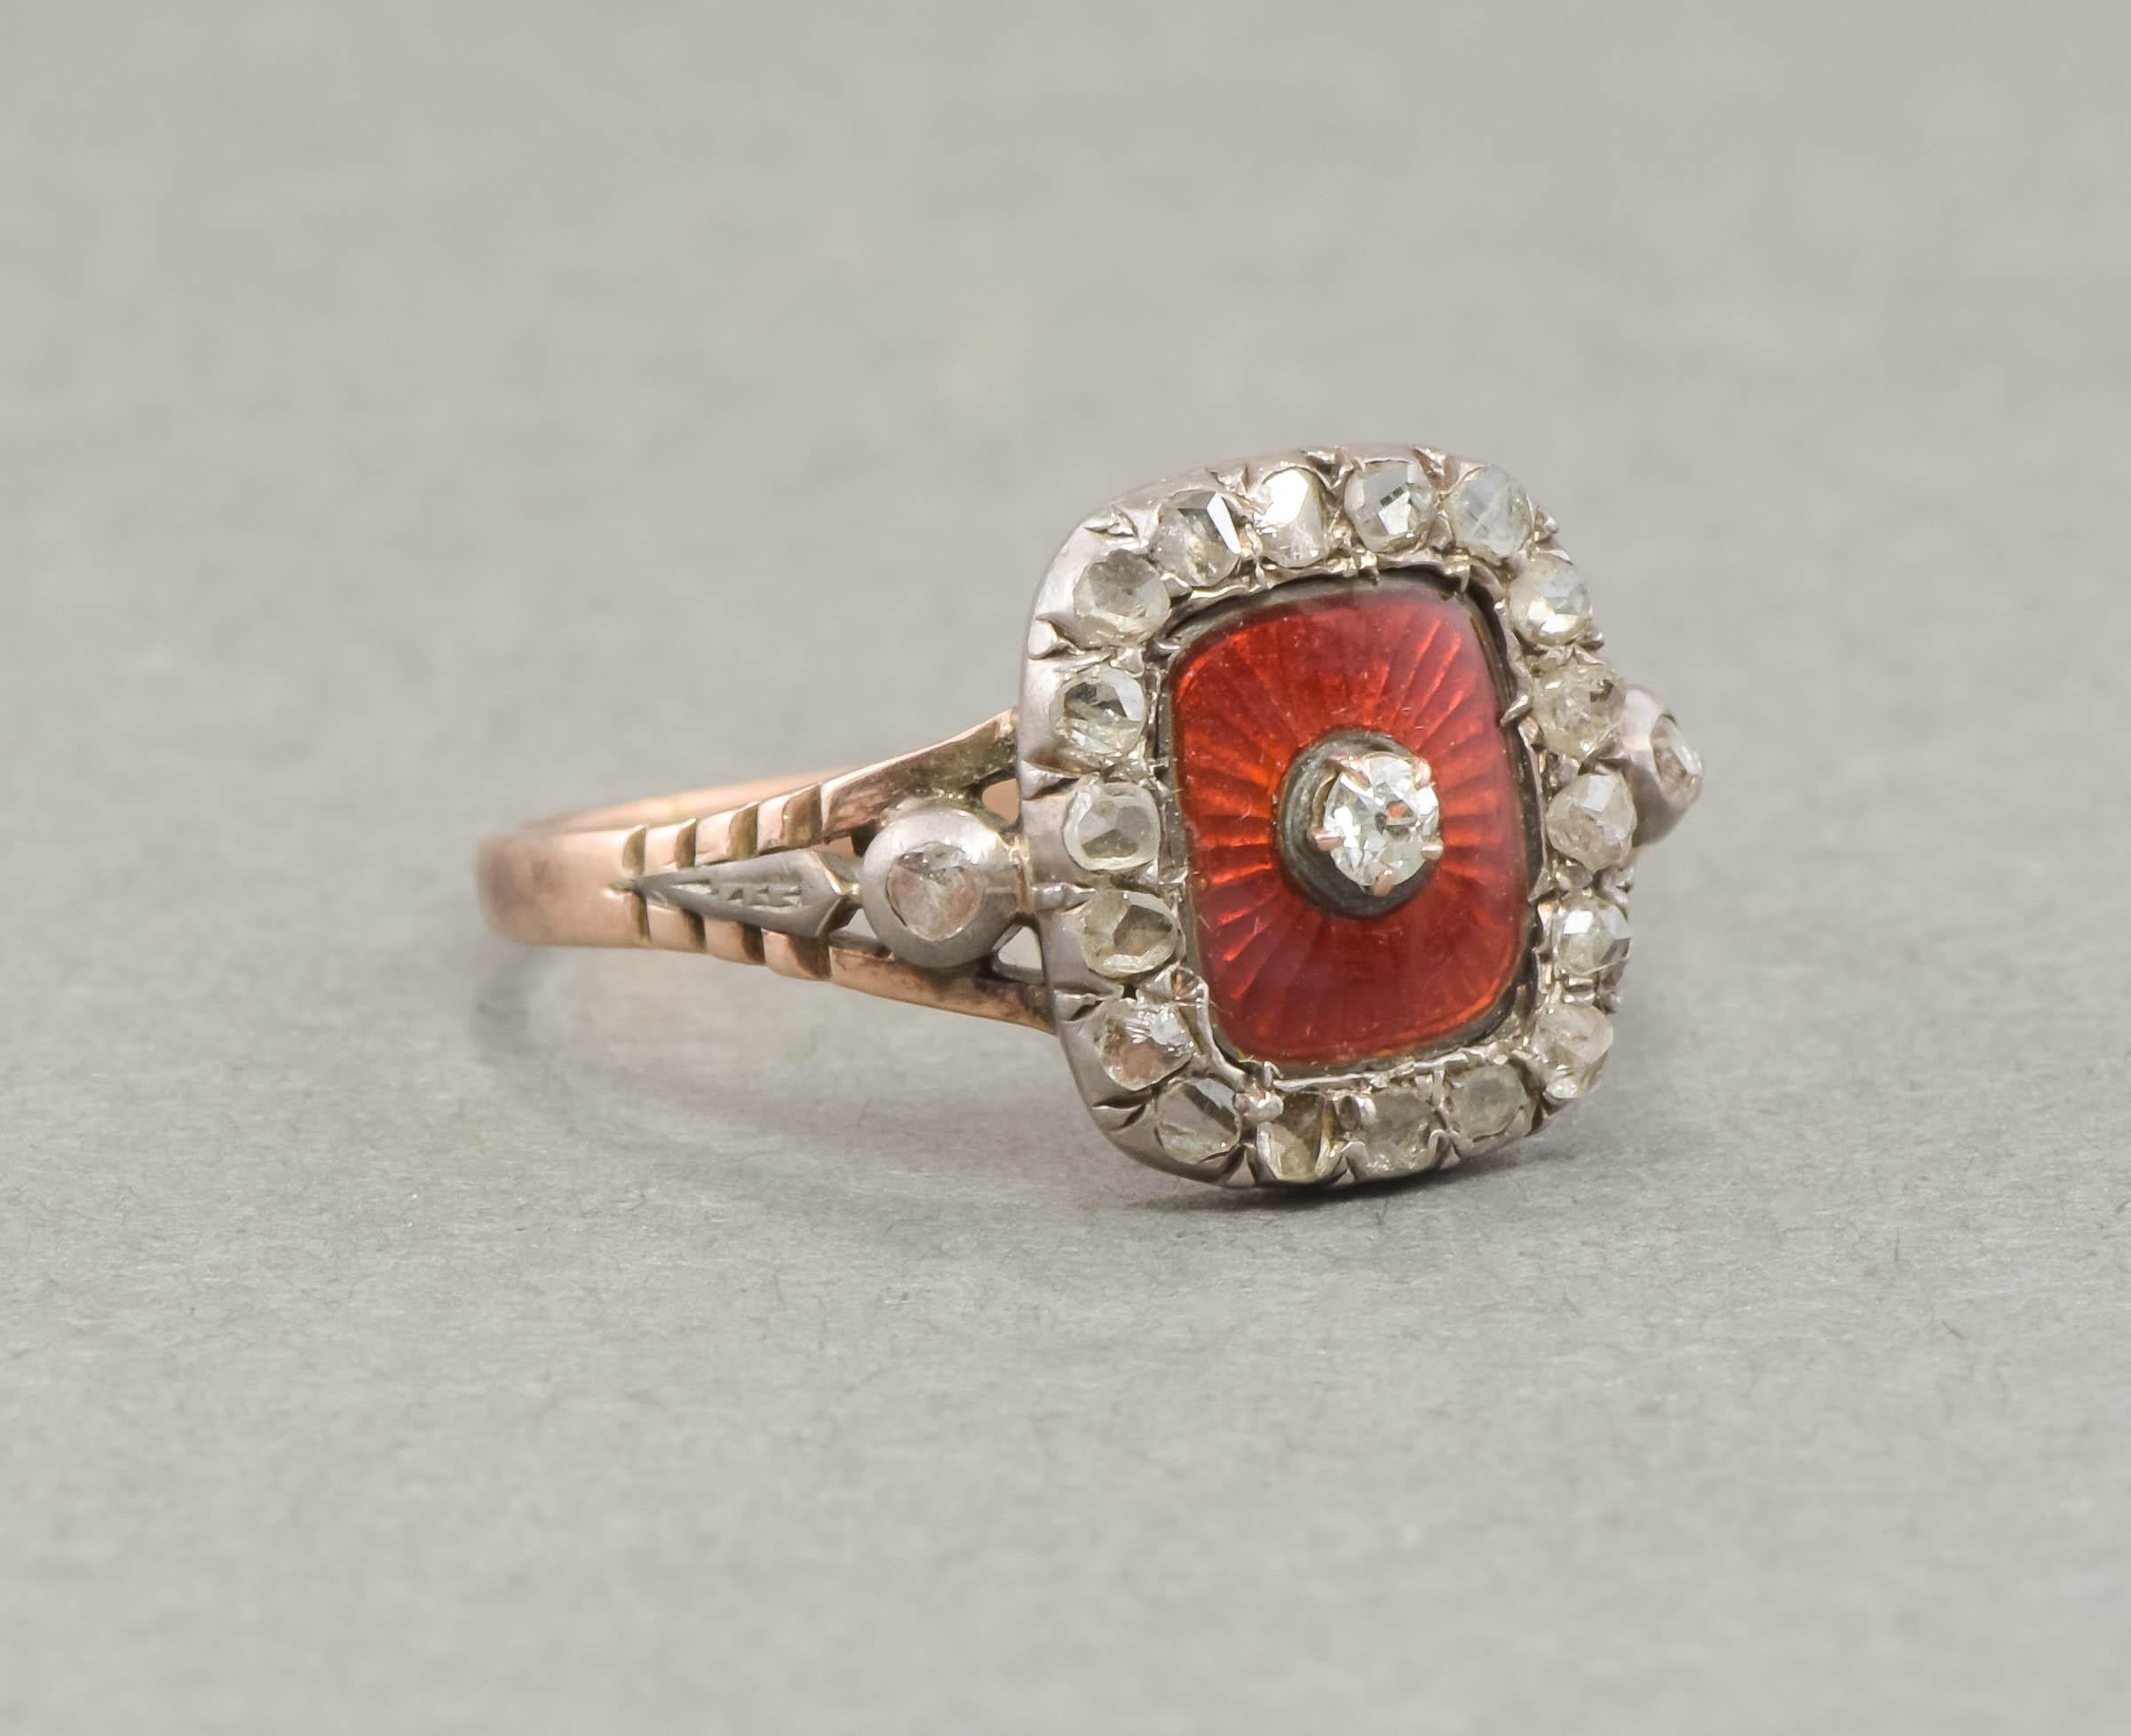 I’m happy to offer this charm filled antique diamond and enamel ring that also comes with wonderful provenance.  I believe this piece is more suited for special event/occasional wear due to its age and delicacy.

Crafted of silver and rose gold that